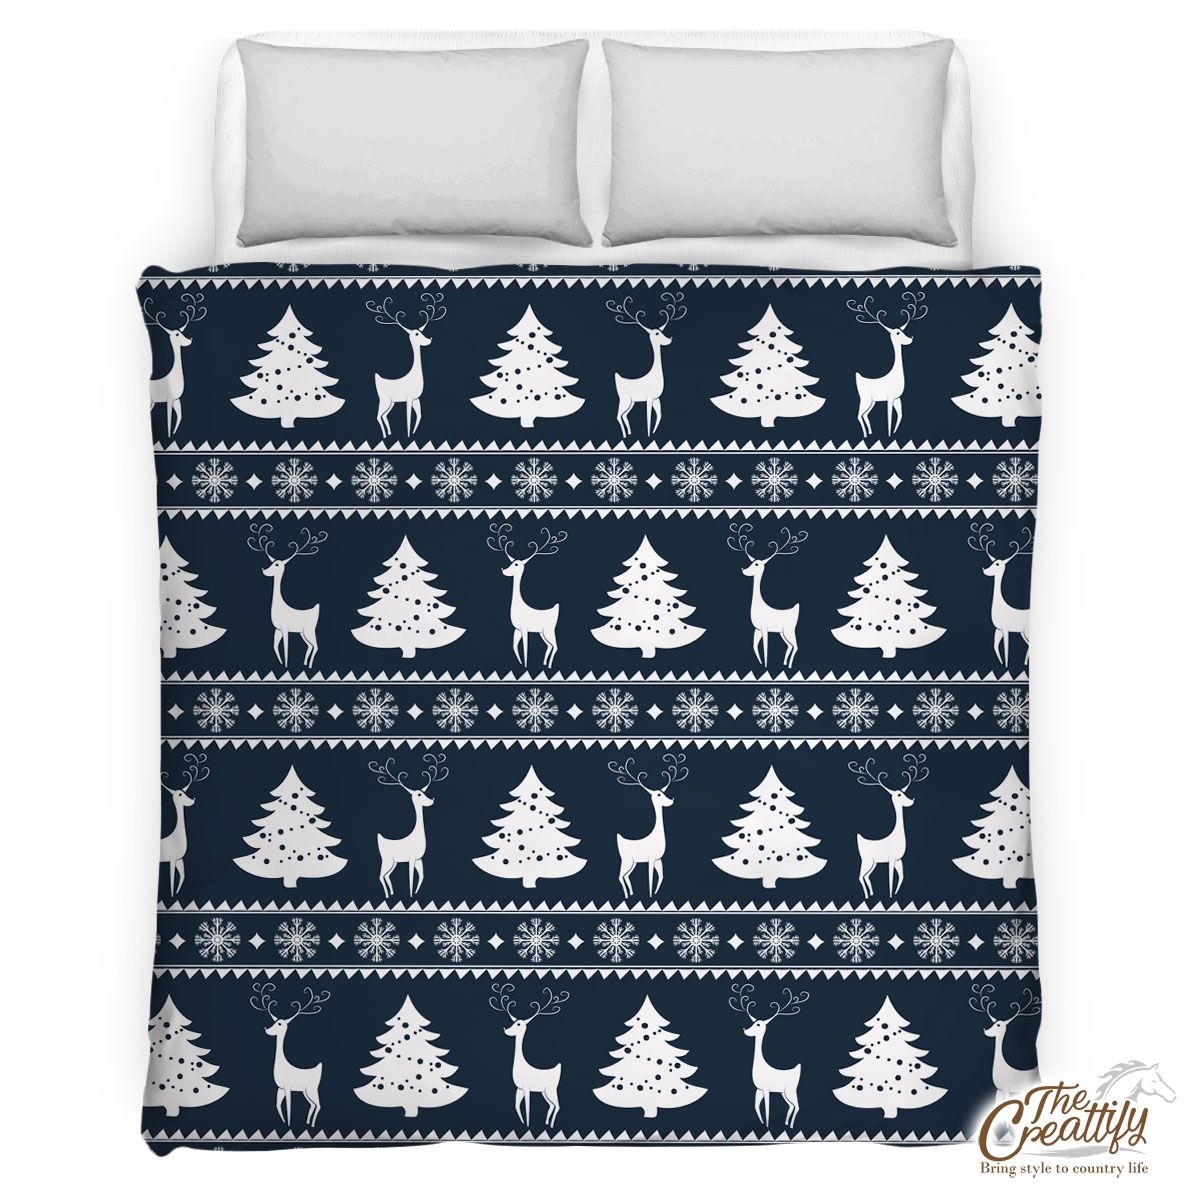 White Deer And Christmas Tree Pattern Comforter